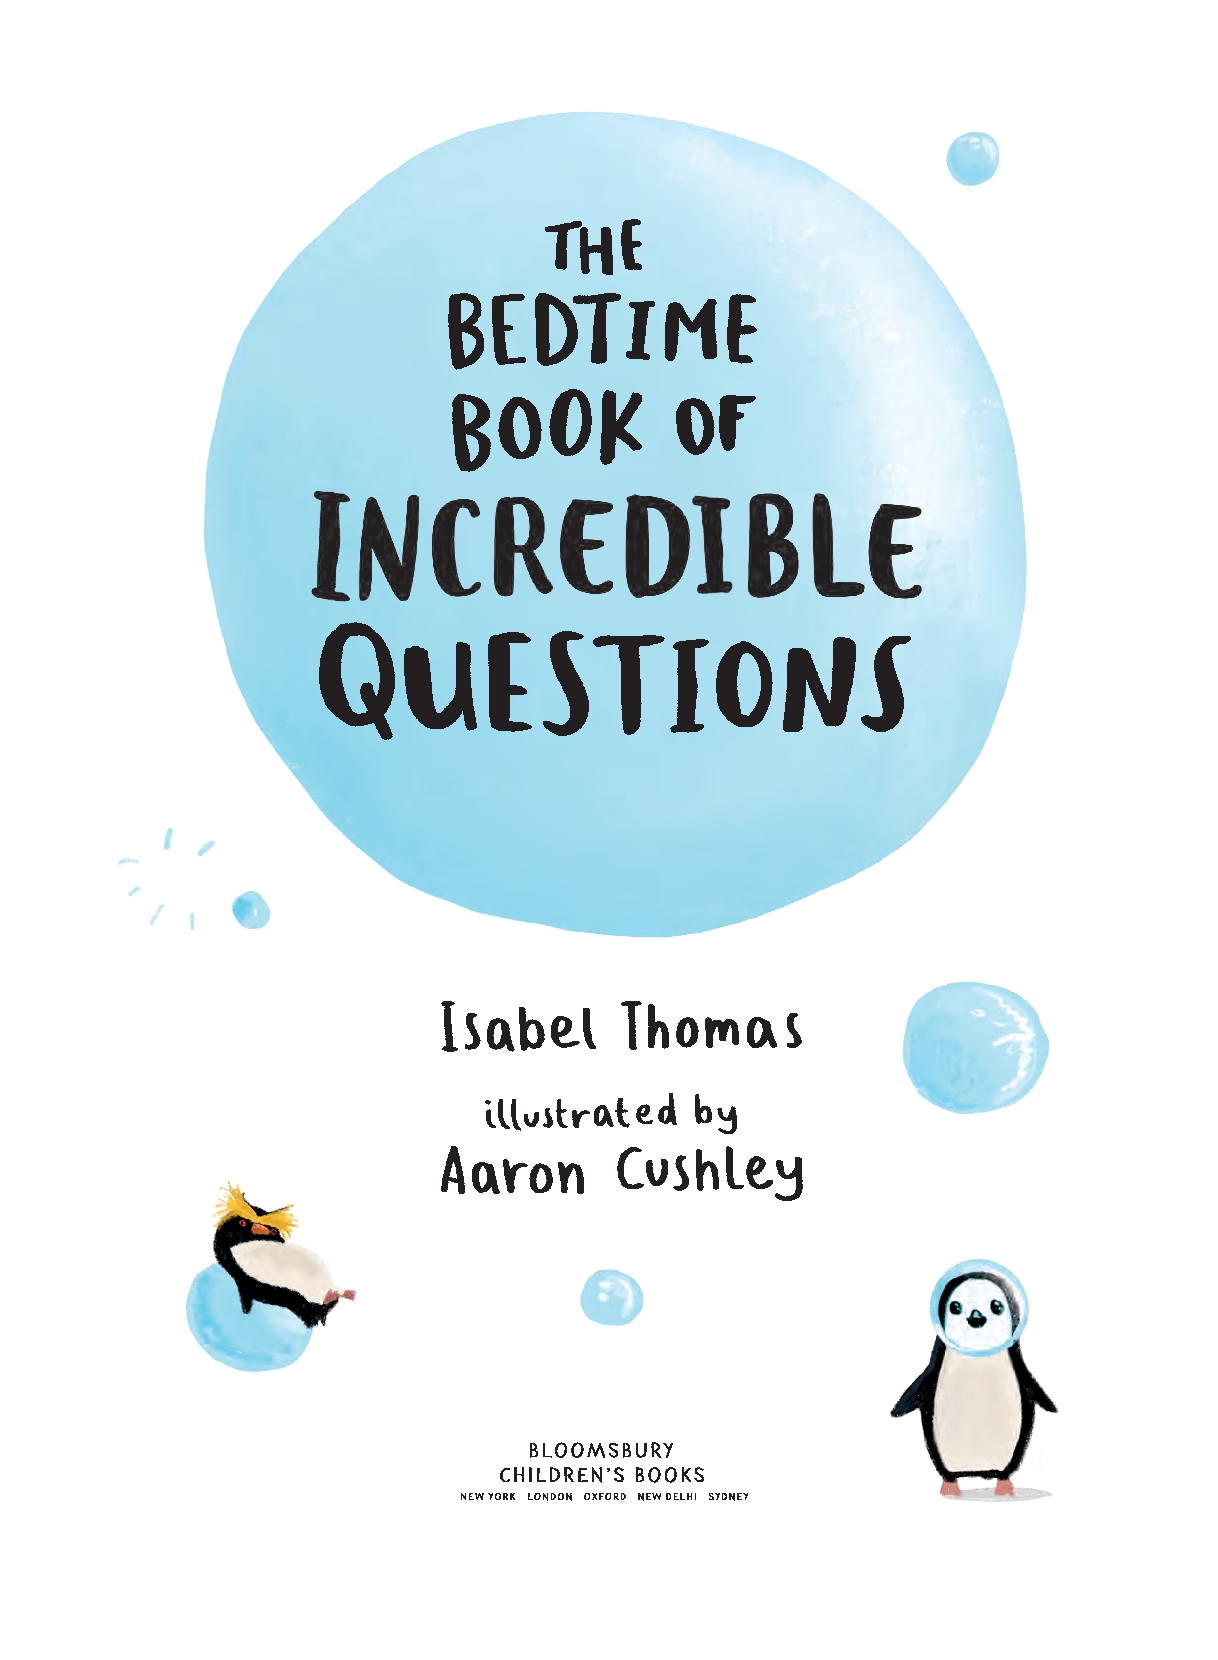 The Bedtime Book of Incredible Questions